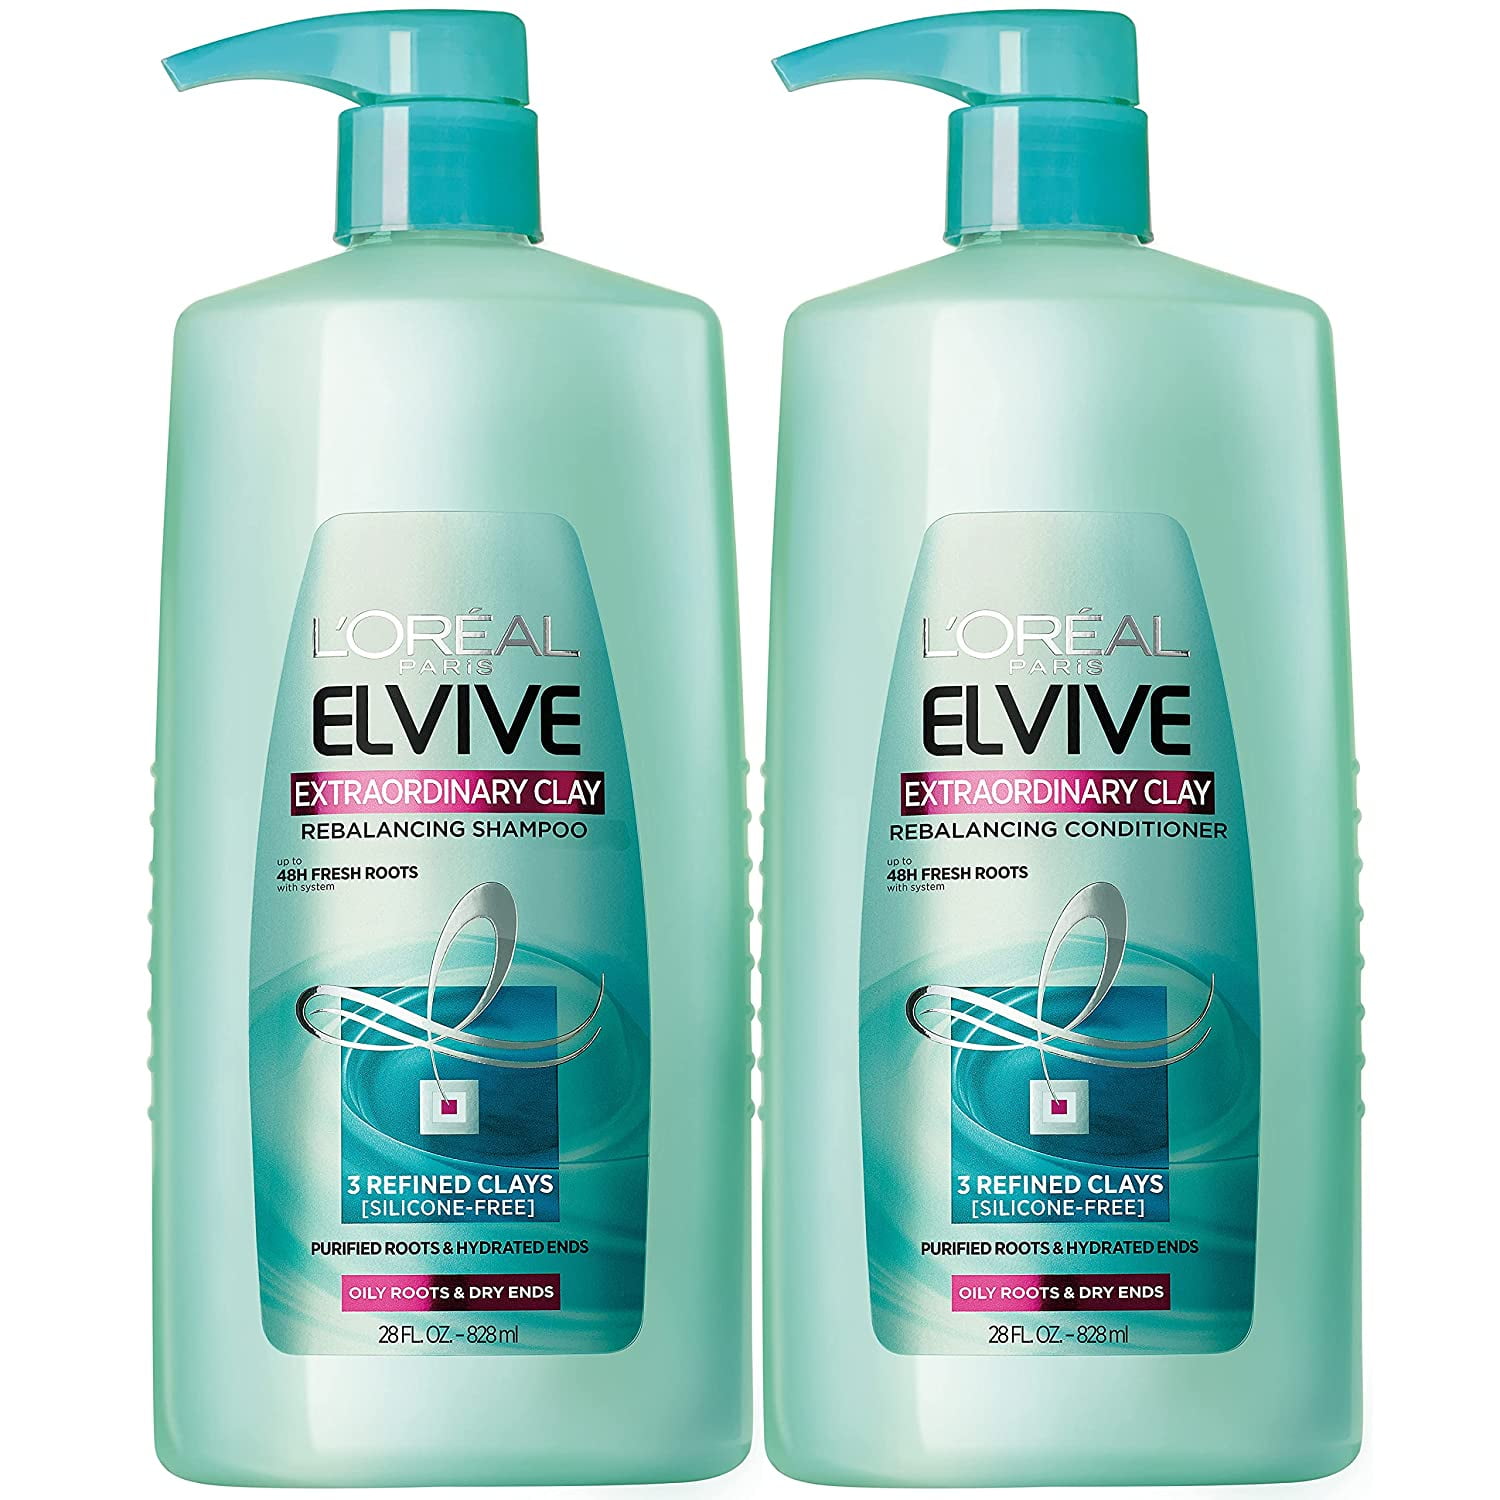 L'Oreal Paris Elvive Extraordinary Clay Rebalancing Shampoo and Rebalancing Conditioner Set for oily hair and dry ends, silicone-free, 1 kit Walmart.com